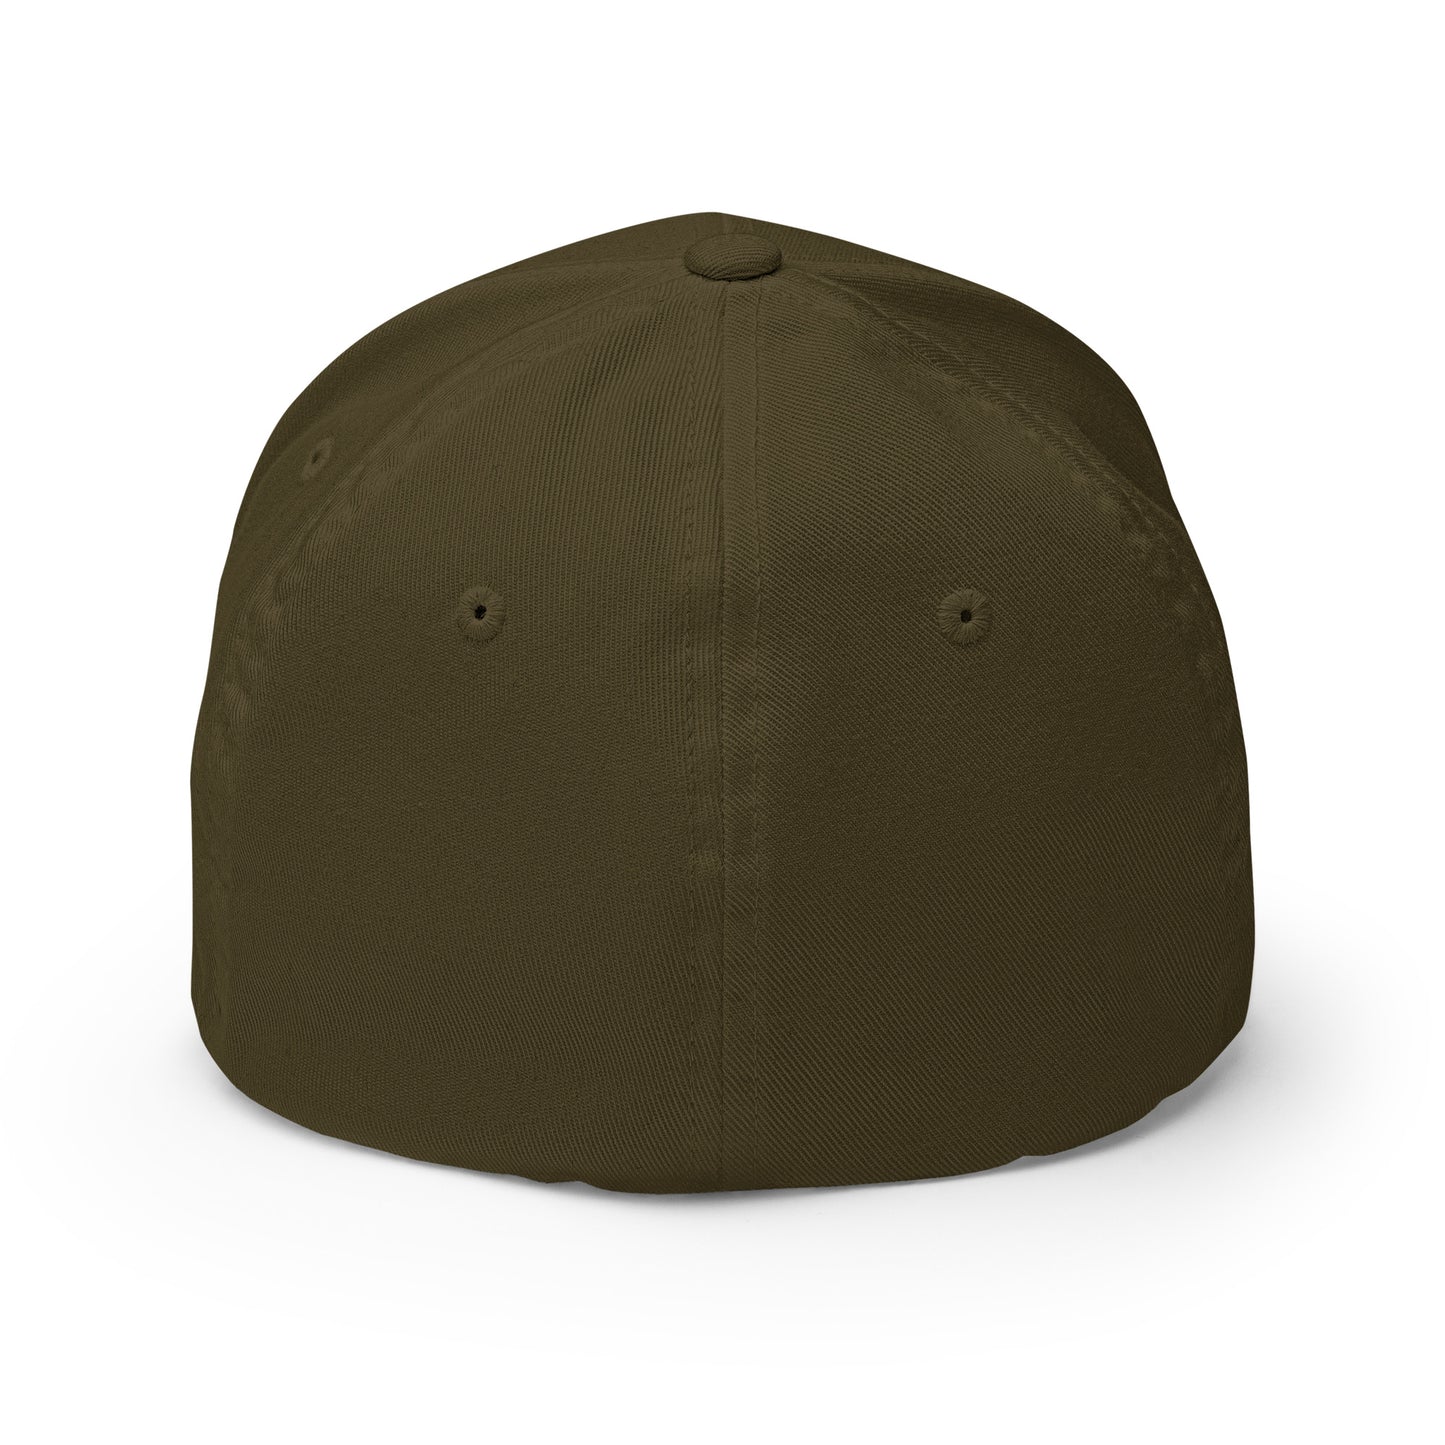  cap-from-the-back-with-frankenstein-symbol